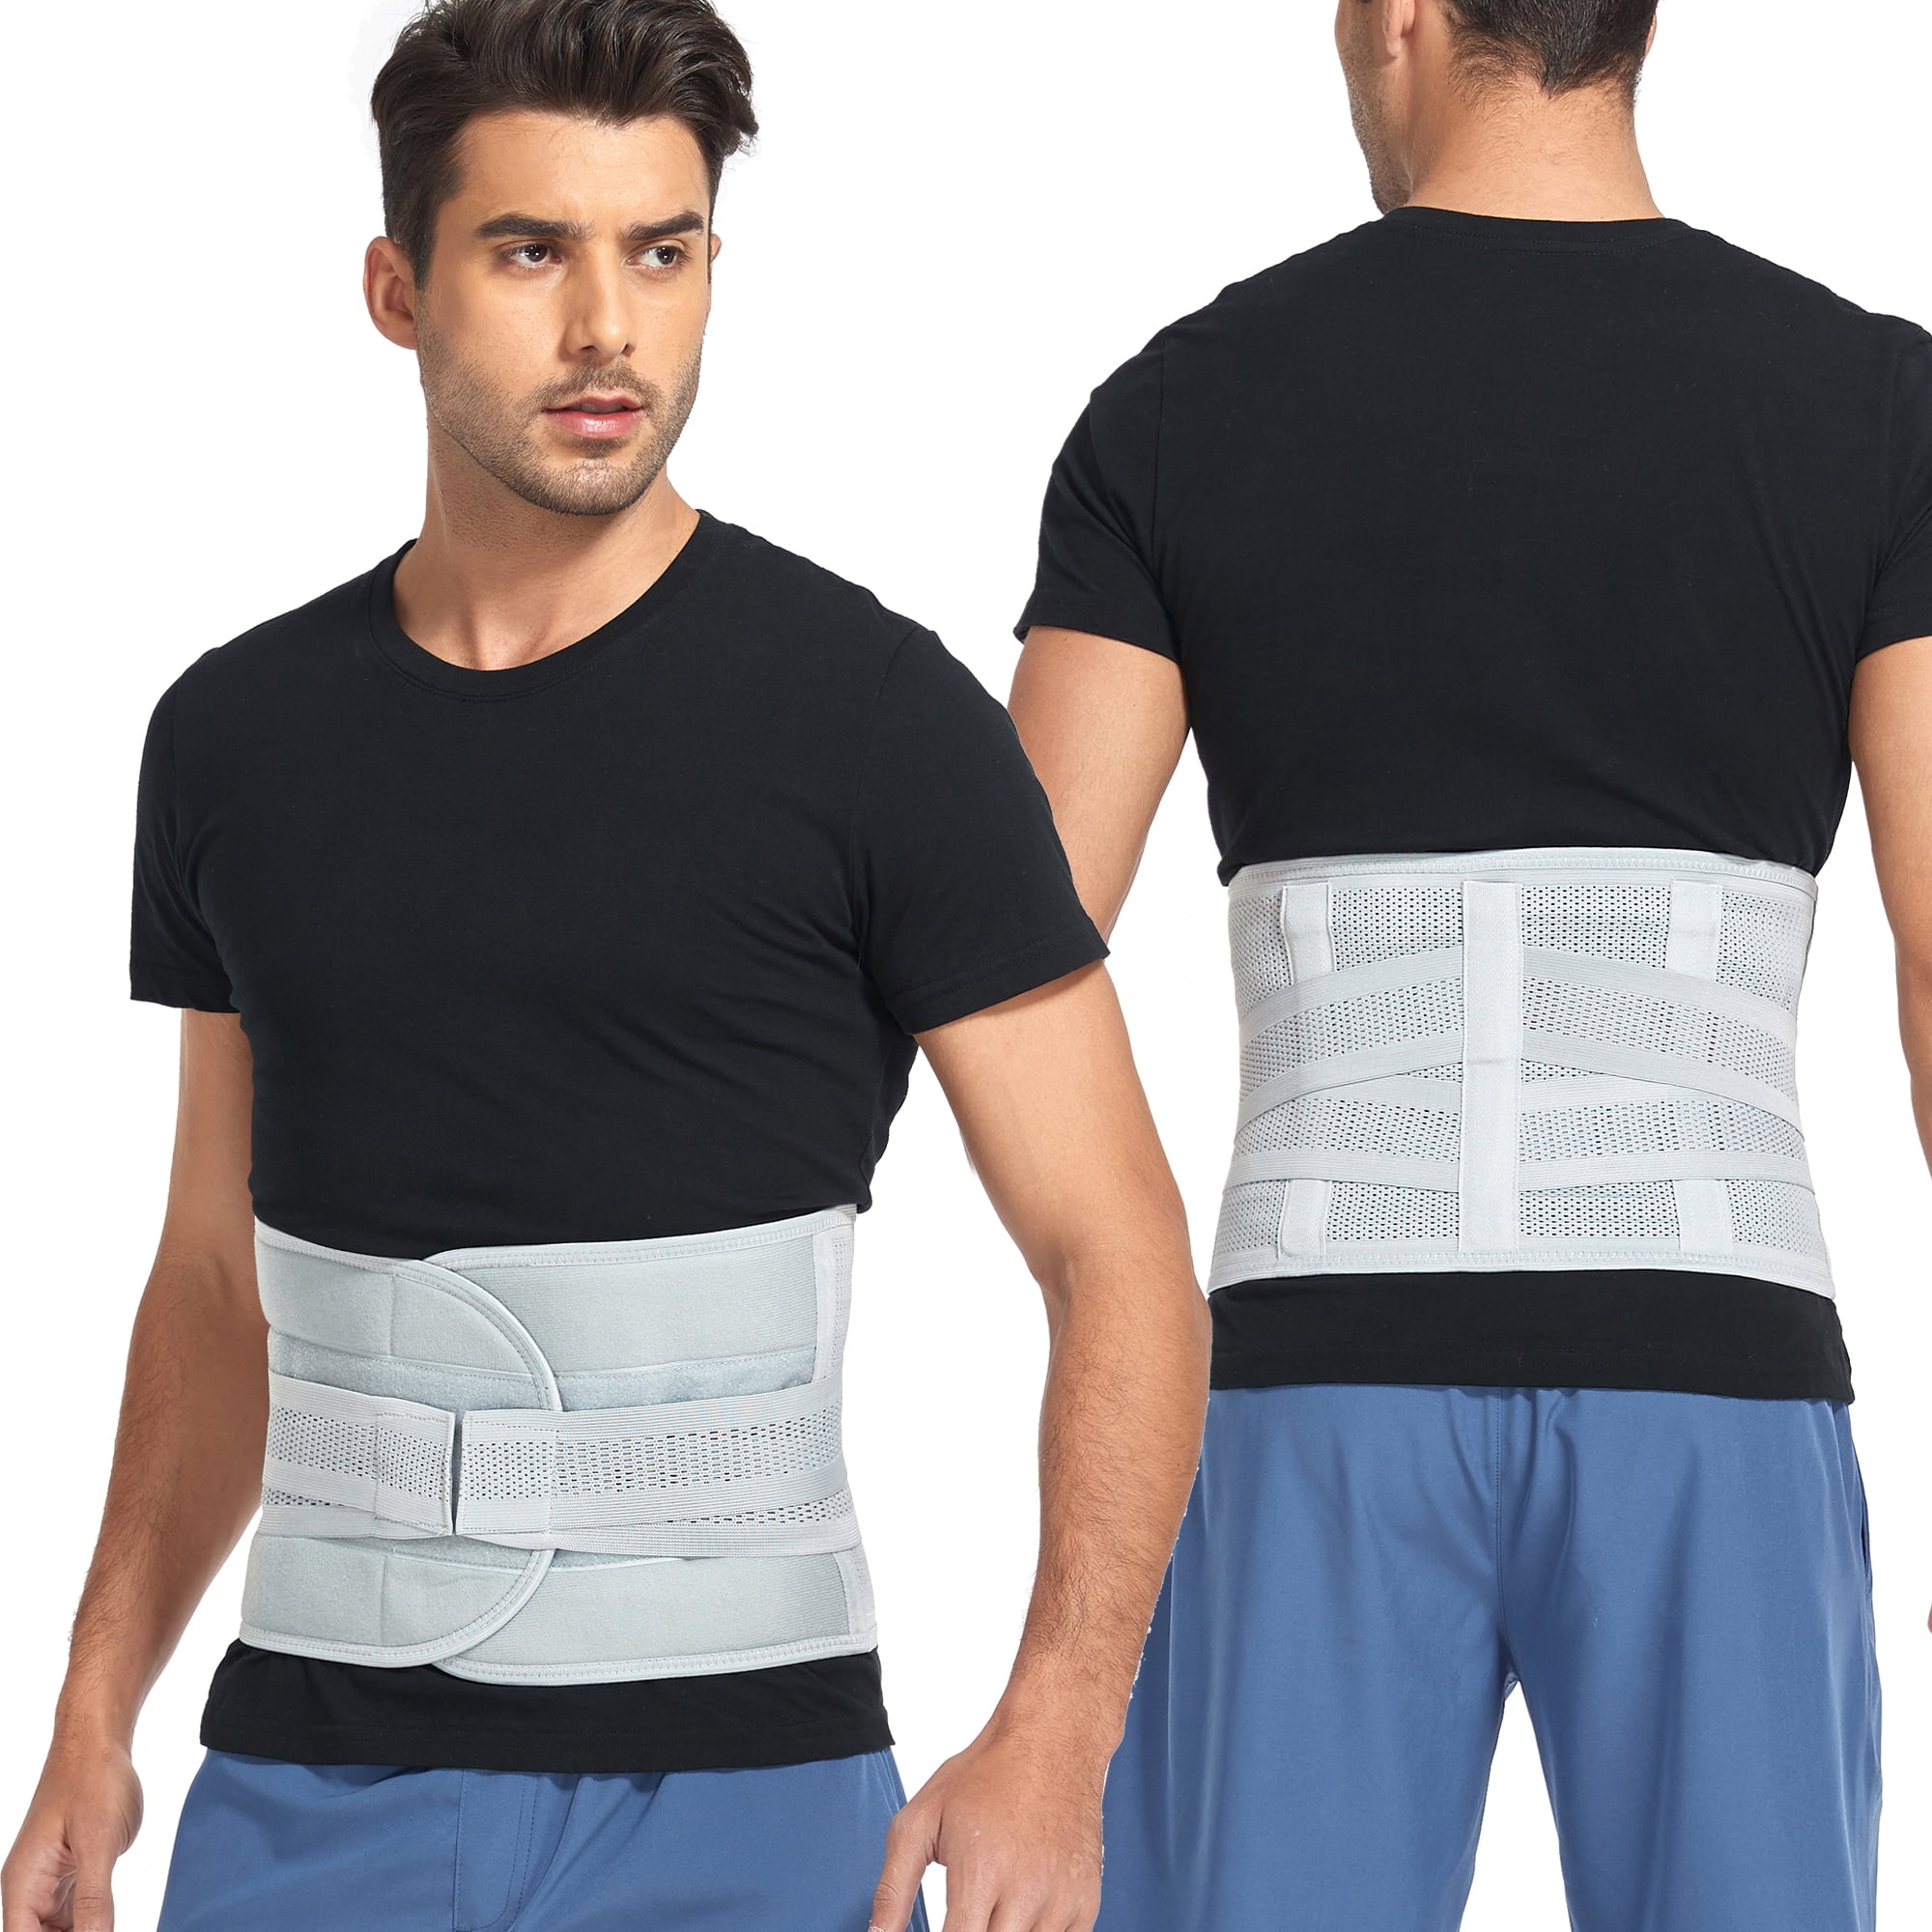 Lower Back Brace And Support Belt For Men And Women, 47% OFF